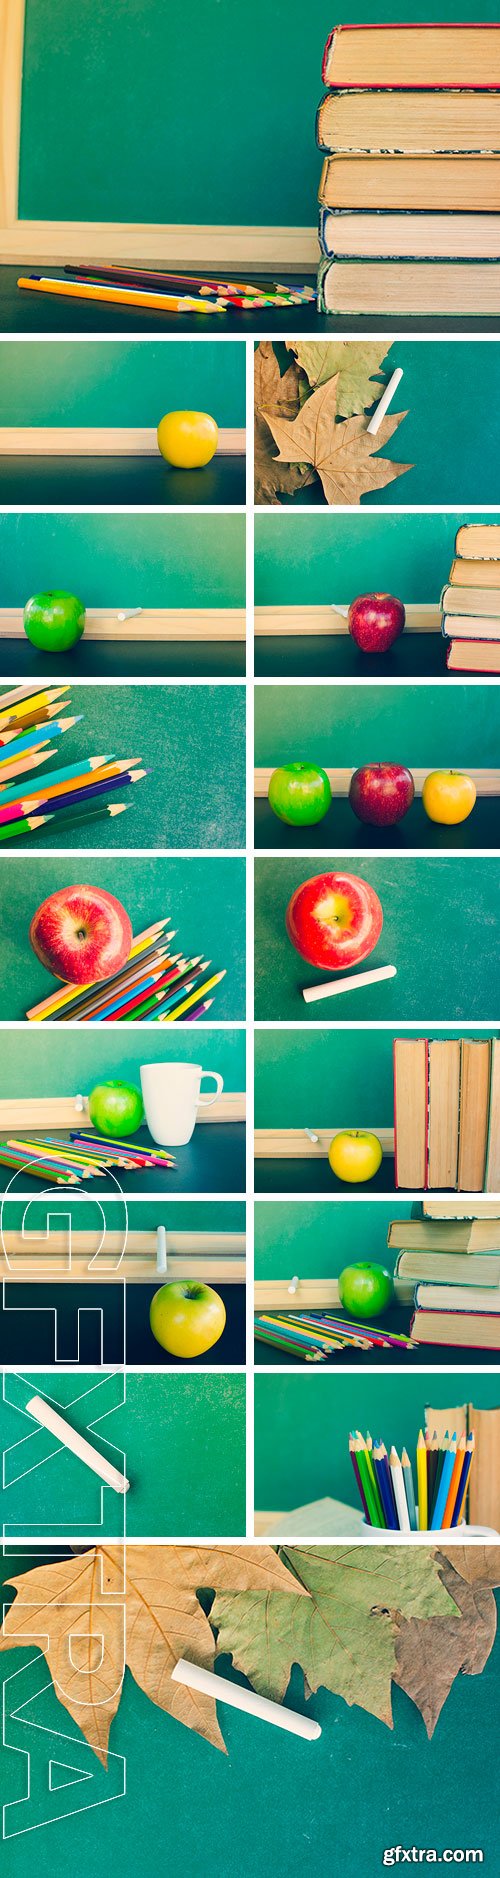 Stock Photos - Back to school background